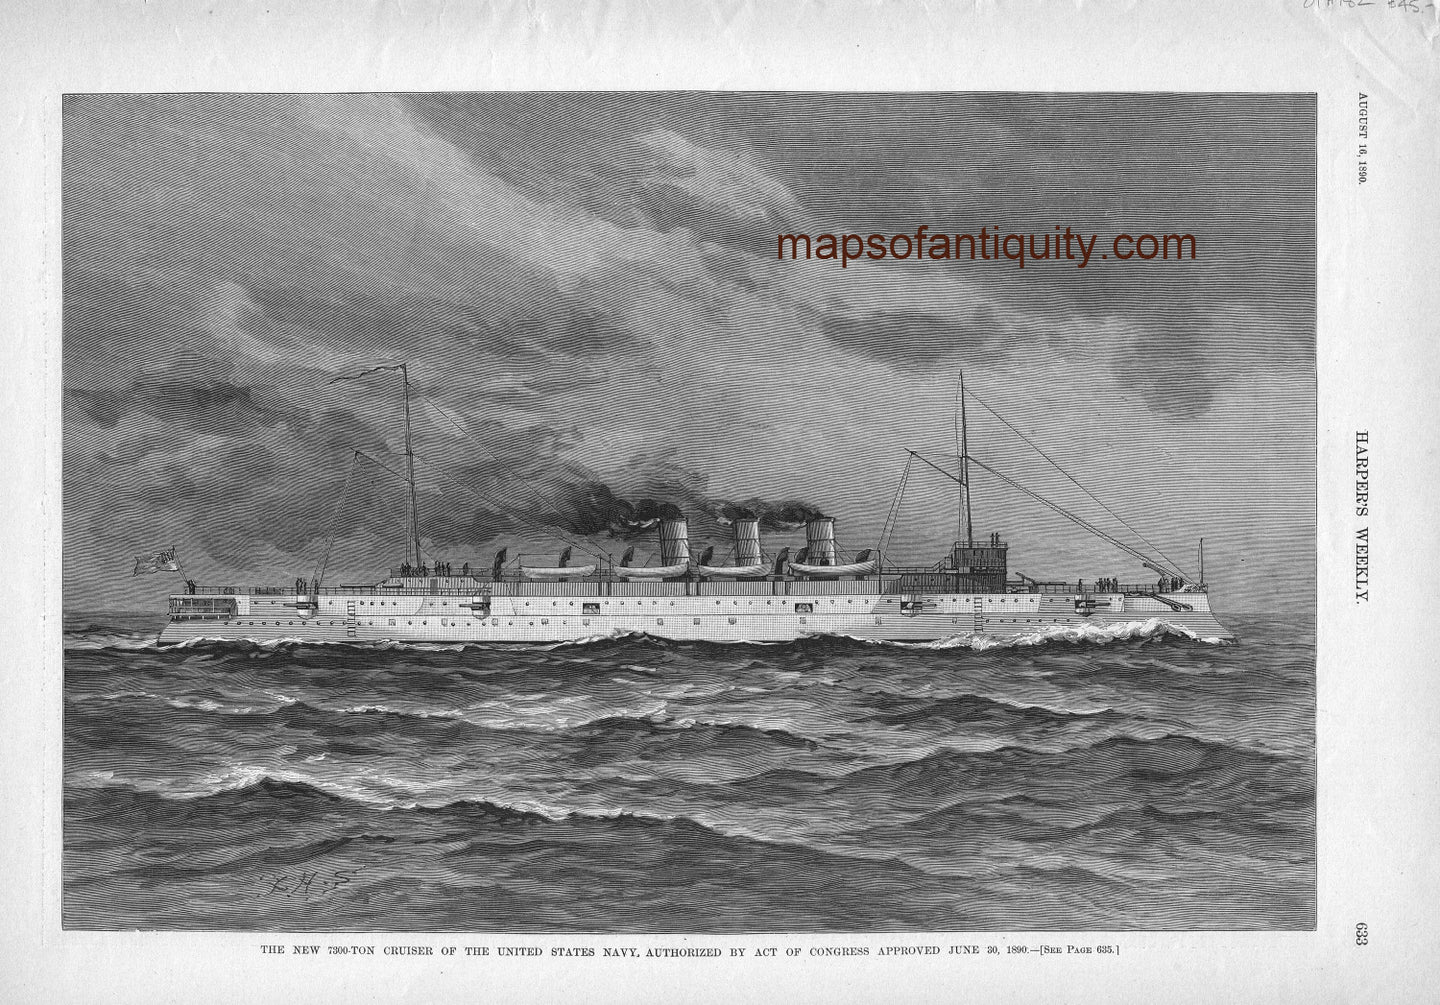 Antique-Black-&-White-Illustration-The-New-7300-Ton-Cruiser-of-the-United-States-Navy---1890-Harper's-Weekly-Maps-Of-Antiquity